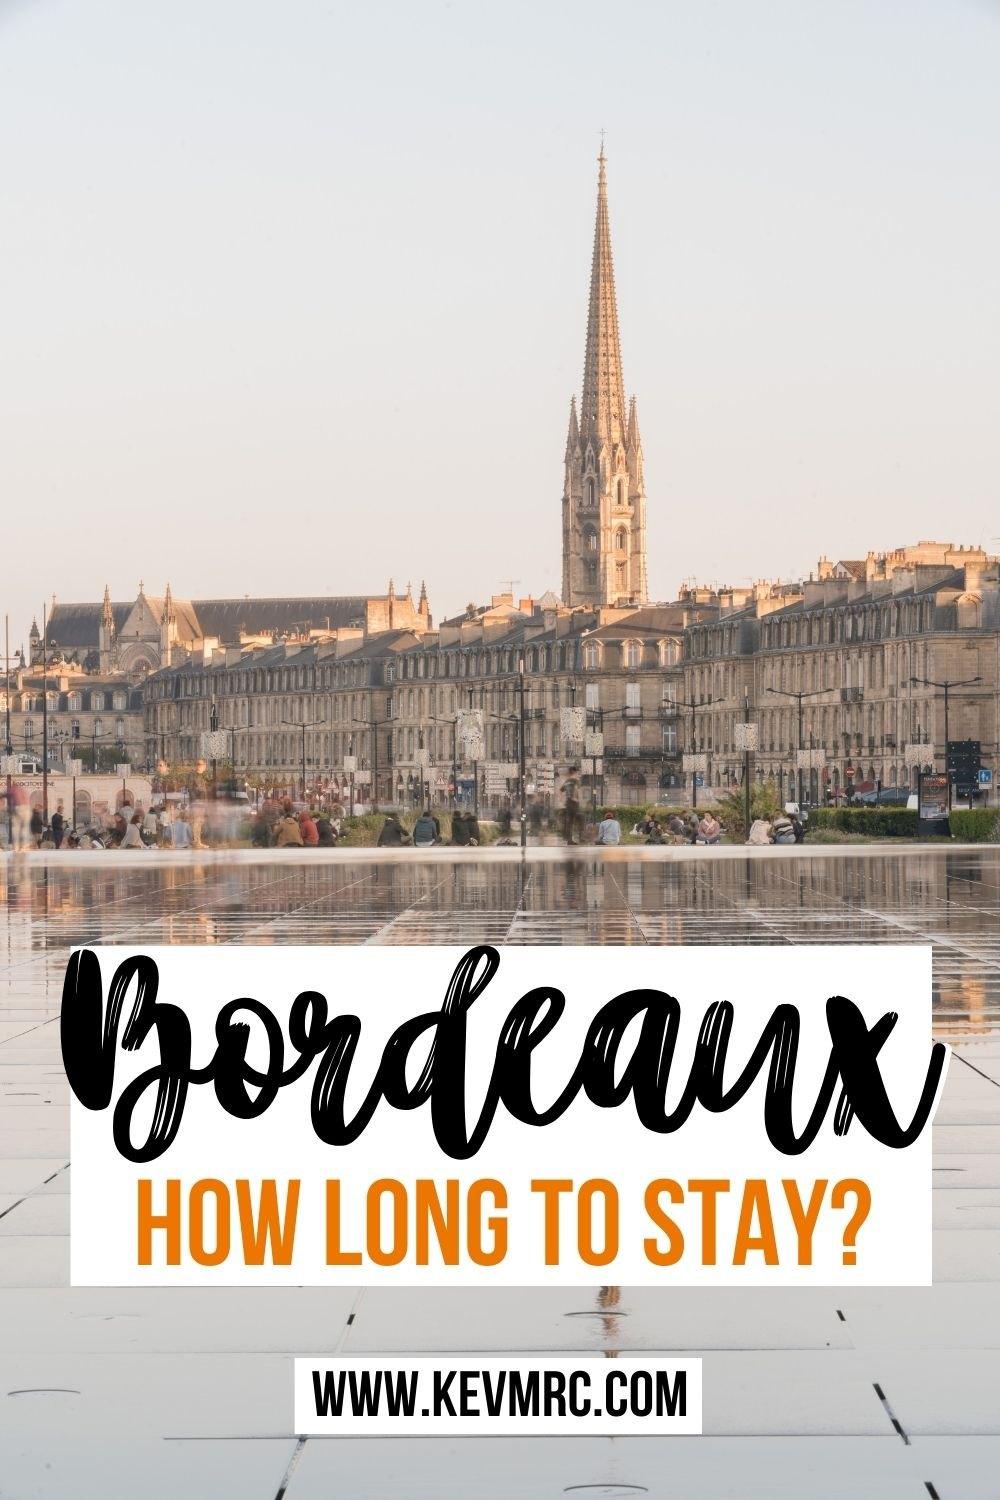 Don't know how many days in Bordeaux you need? Find out the right number of days to spend in Bordeaux based on your interests or travel style. bordeaux travel guide | visit bordeaux 